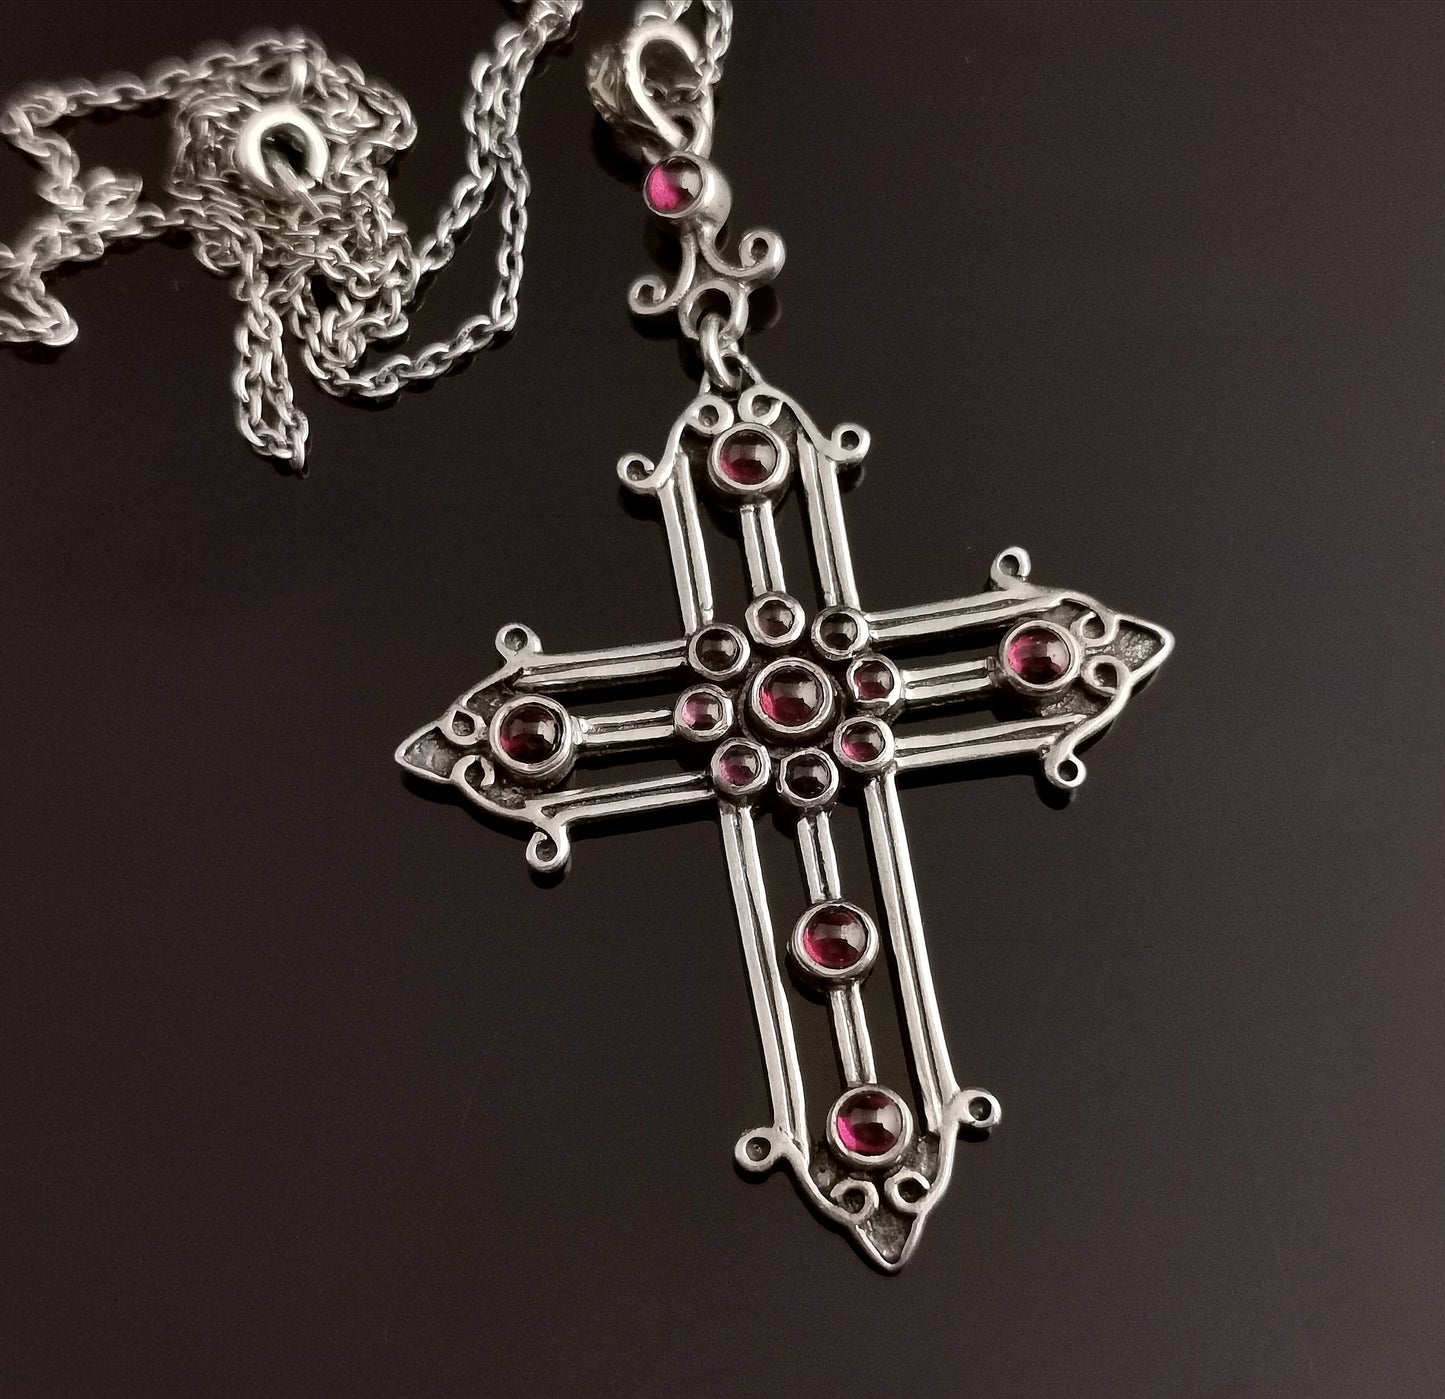 Vintage silver and paste Cross pendant, necklace